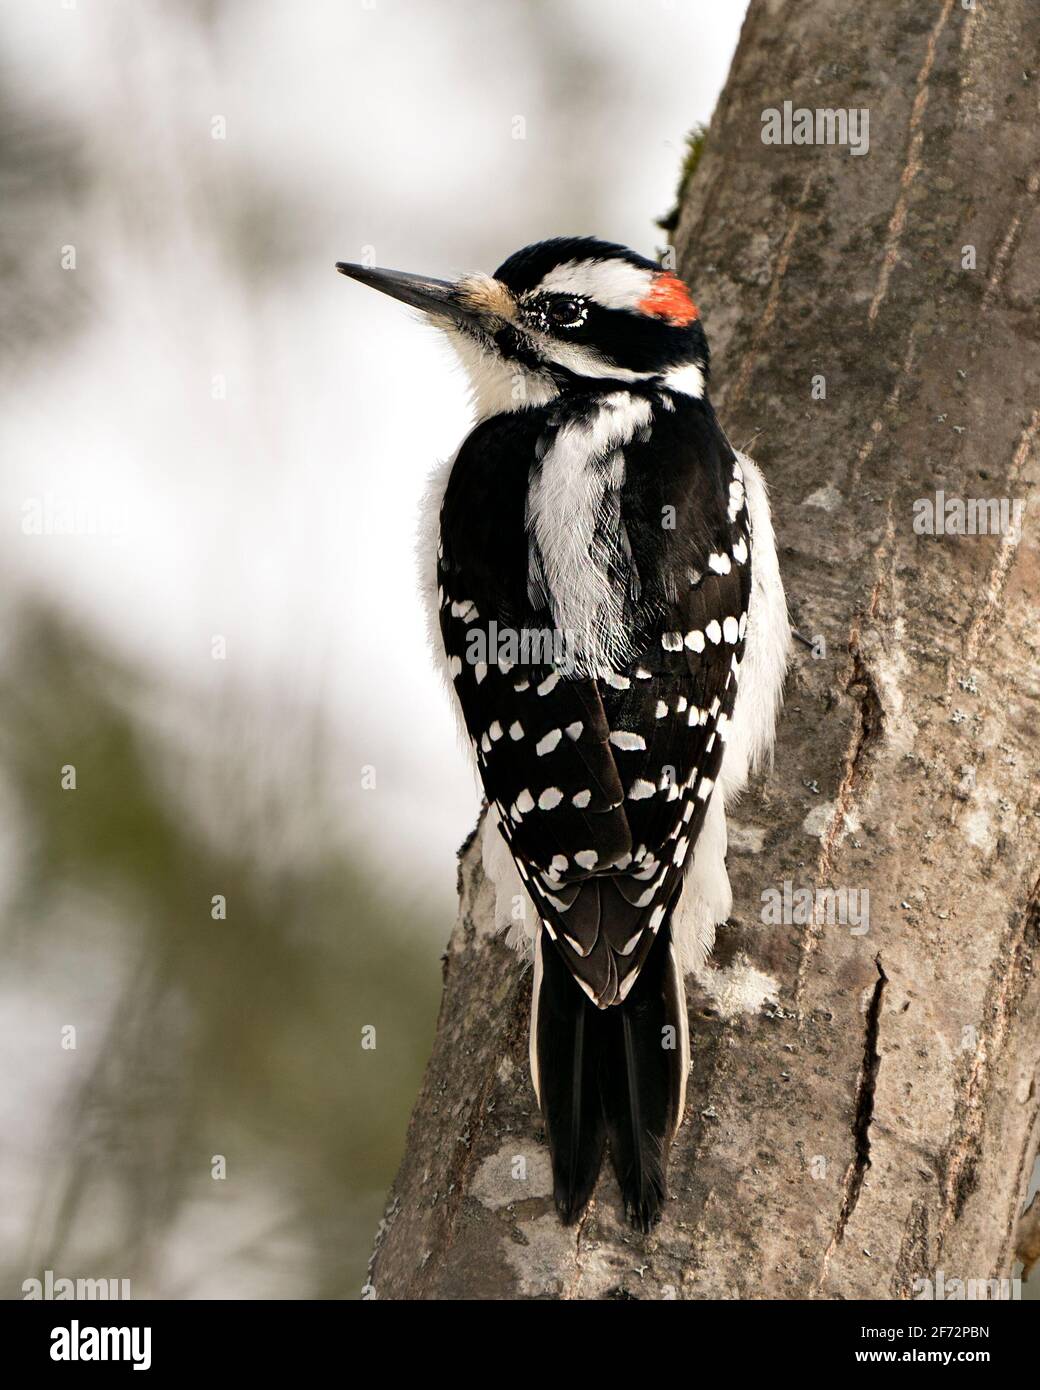 Woodpecker close-up profile view climbing tree trunk and displaying feather plumage in its environment and habitat in the forest with a background. Stock Photo